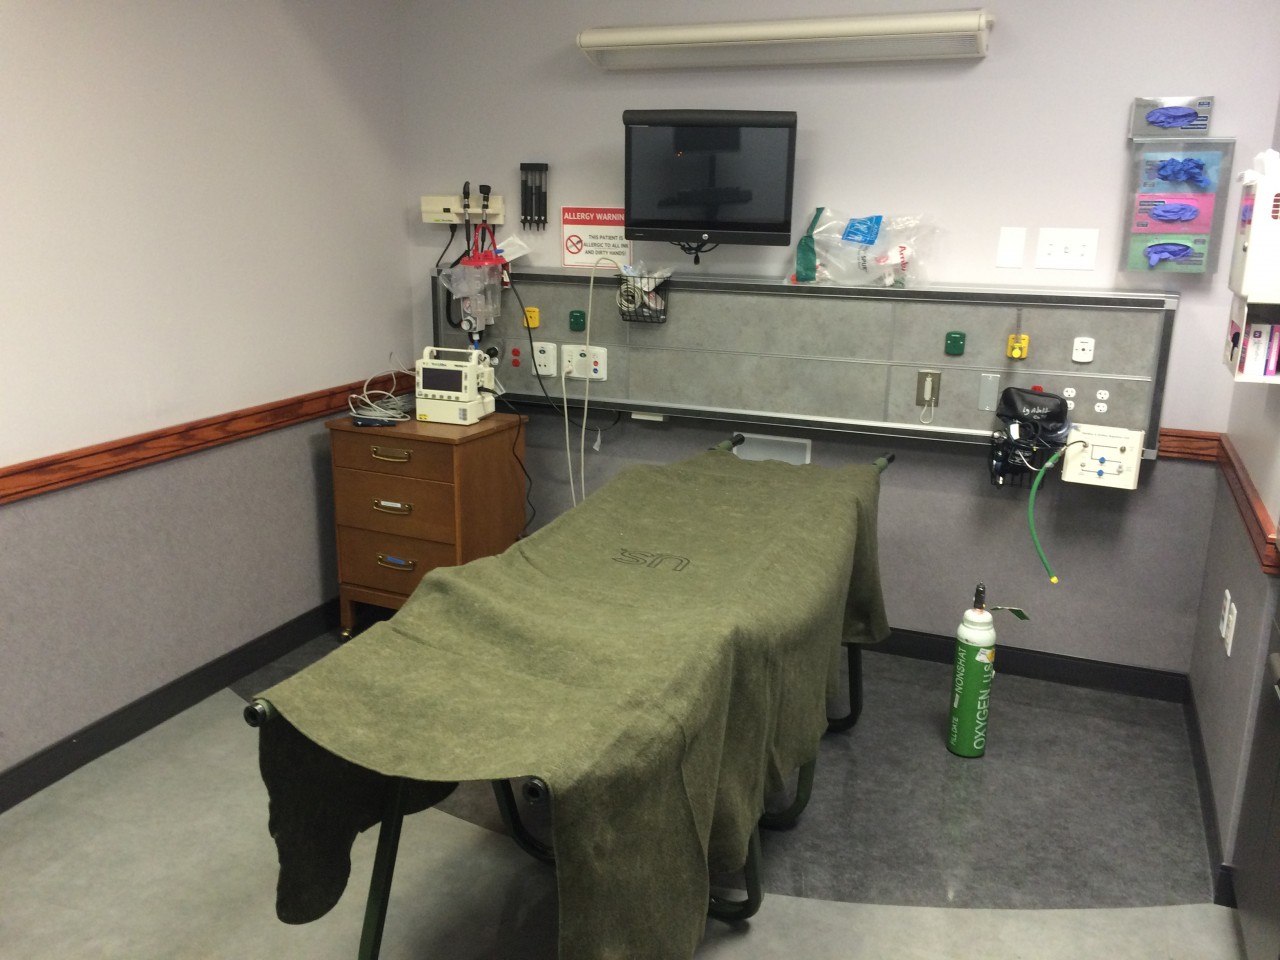 Simulated surgical room